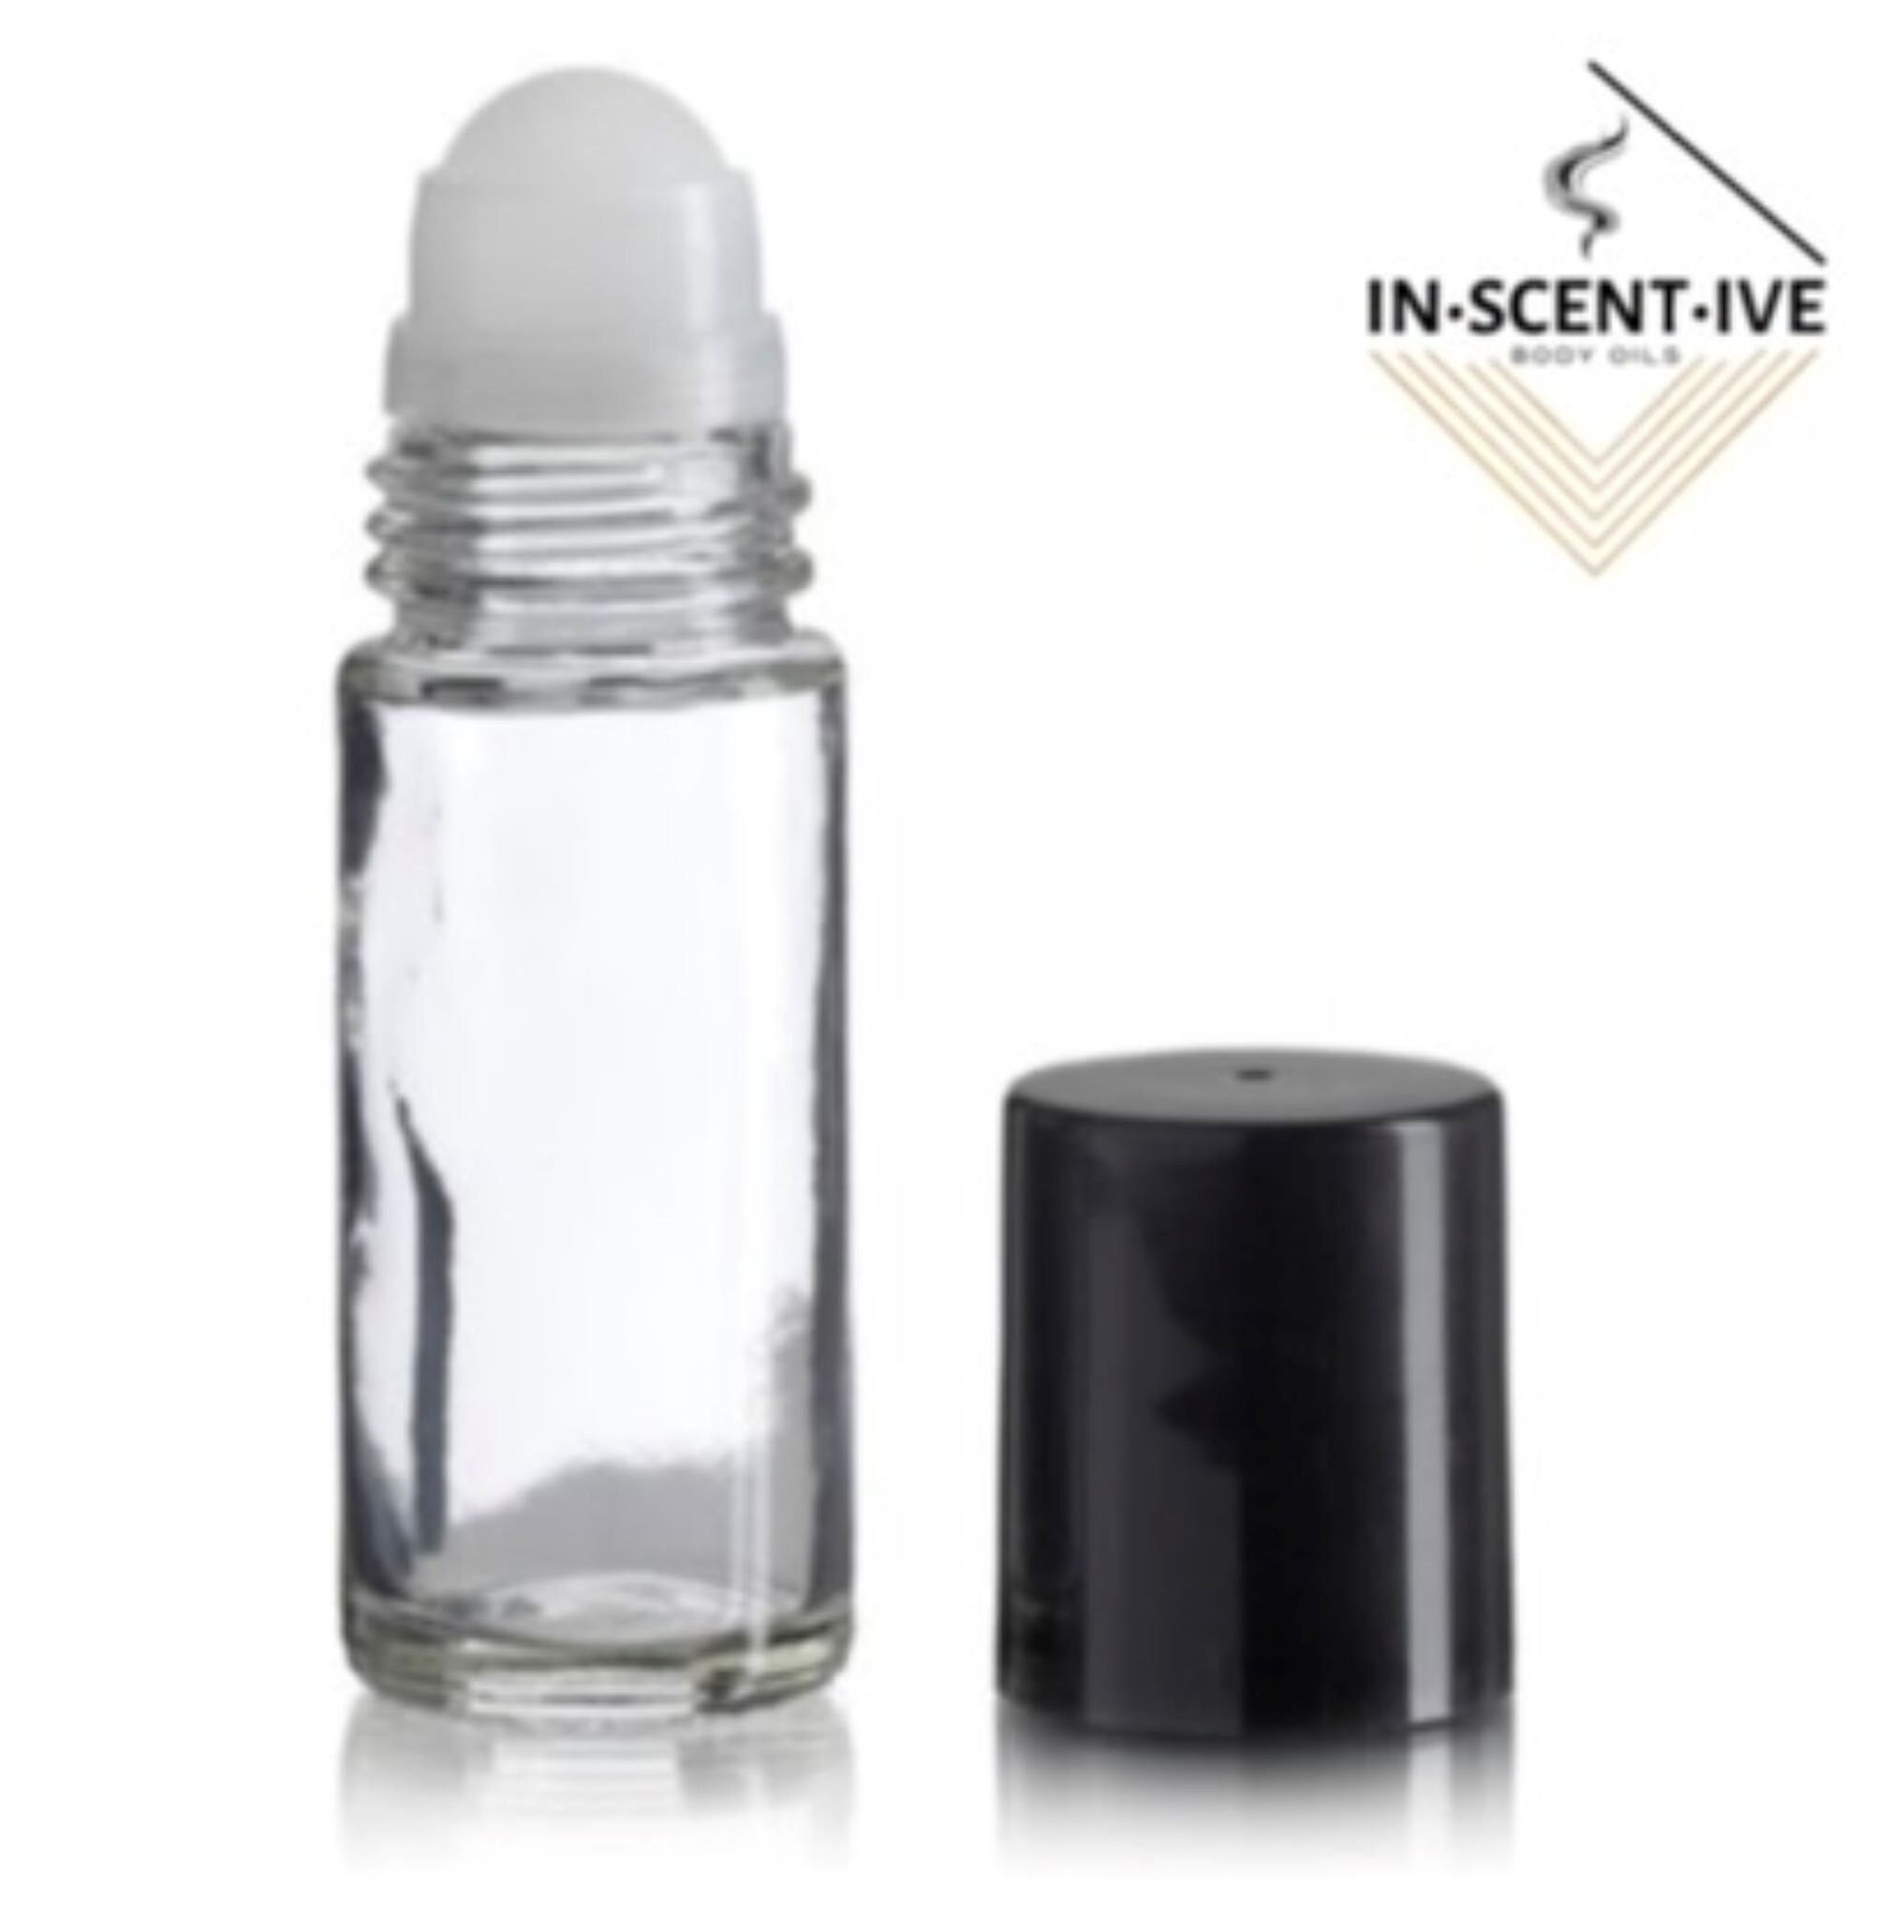 Natural Perfume Oils Roll on Perfumes Men & Women's Natural Cologne  Fragrance Scents Roll on Body Oil W/ Essential Oils 10 Ml 